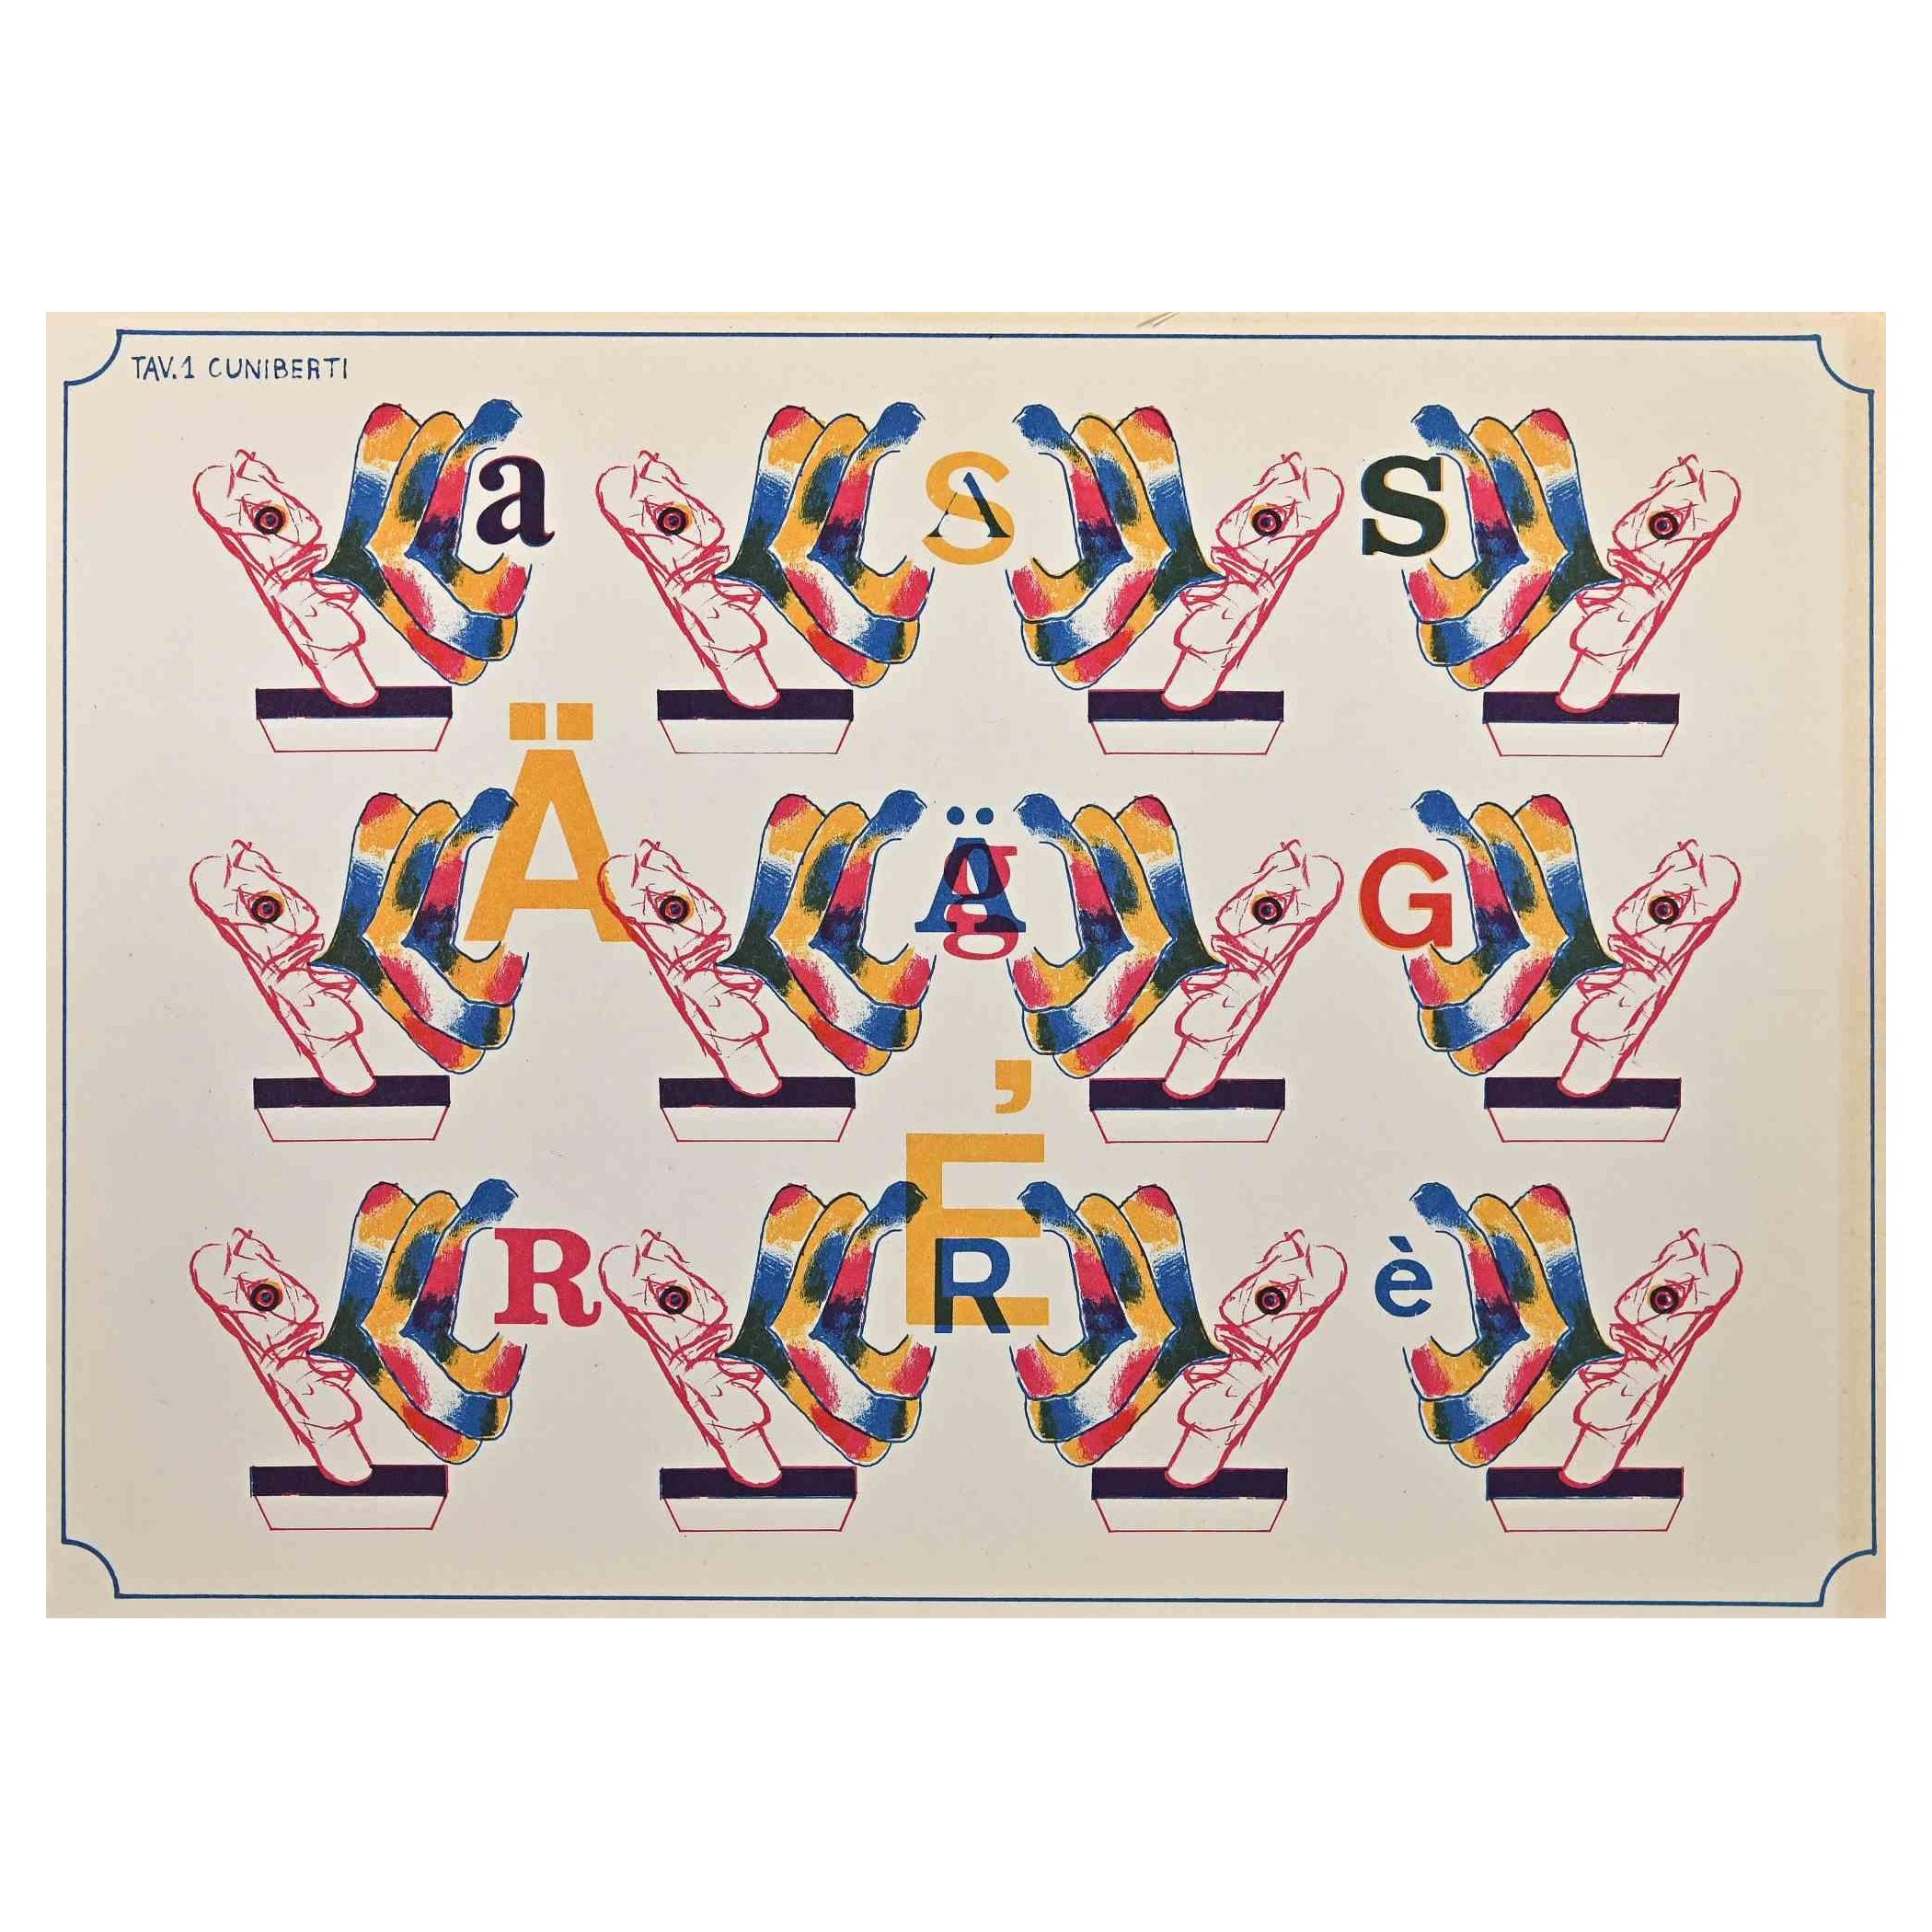 Pattern is an original lithograph realized by Pirro Cuniberti in the 1960s.

Good conditions.

The artwork is depicted through harmonious colors.